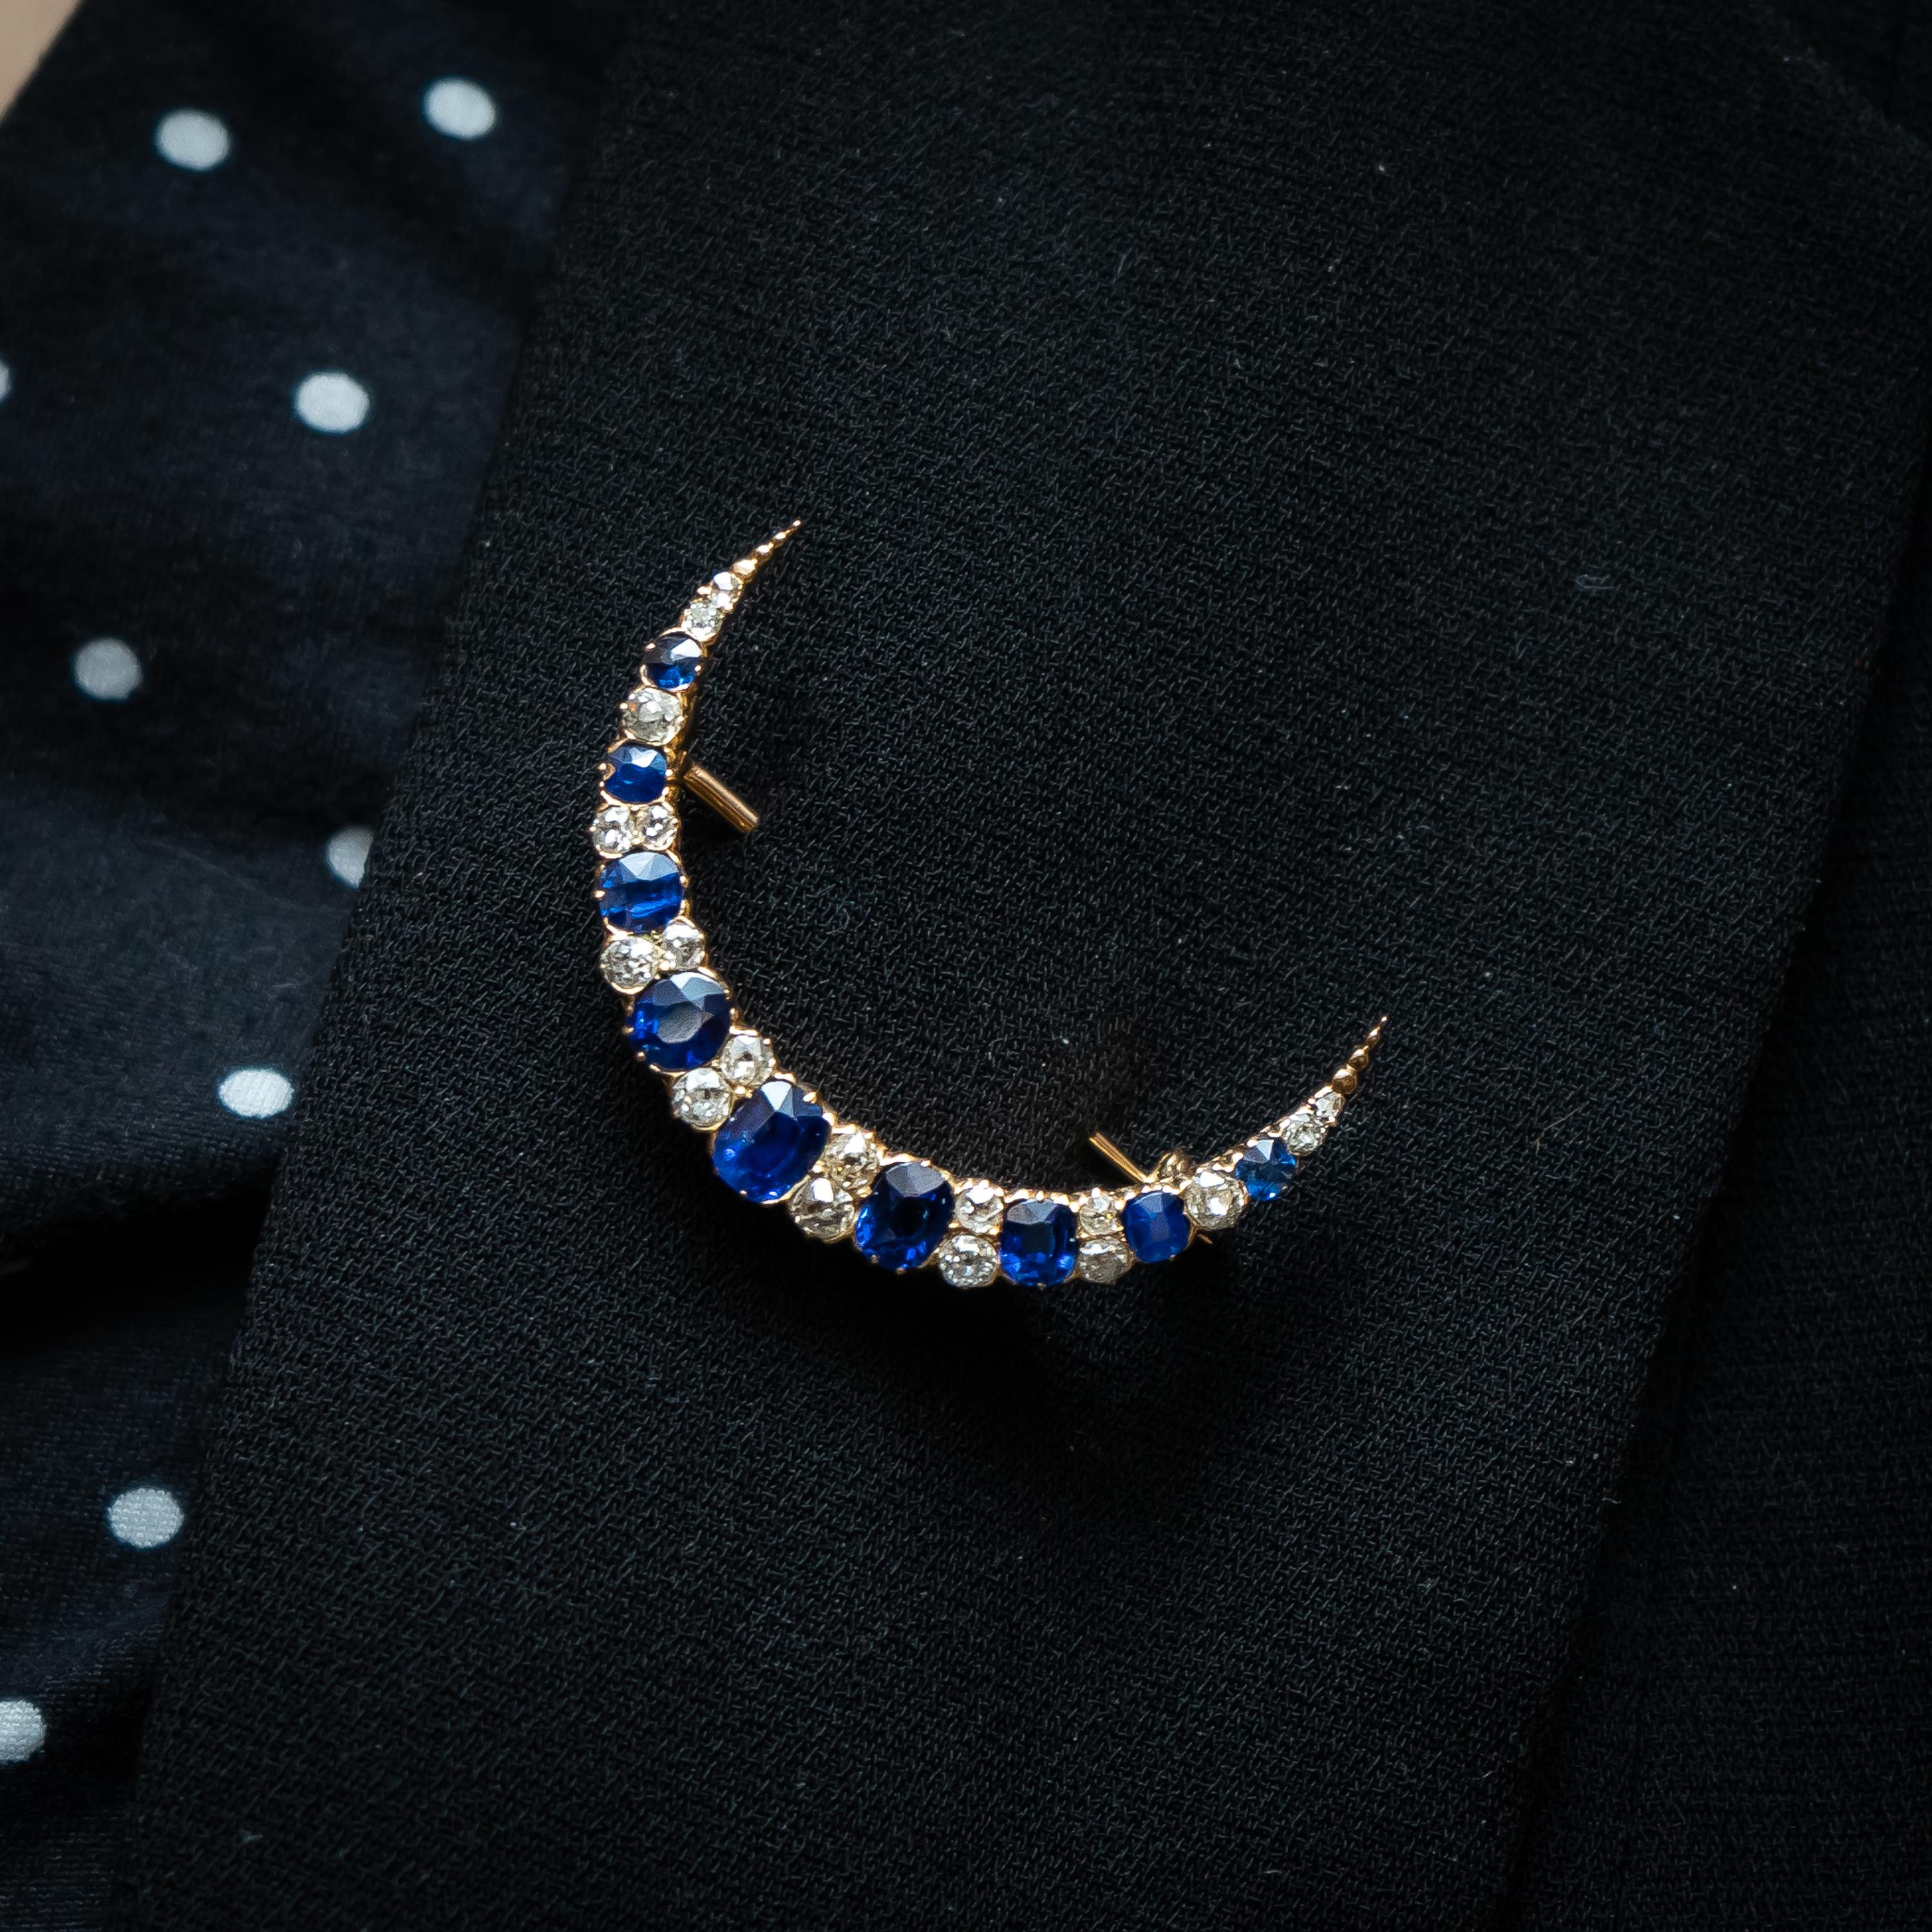 A Victorian sapphire and diamond crescent brooch, set with cushion shaped faceted sapphires, spaced with old-cut diamonds, in six pairs, two singles and two rose-cut diamonds, mounted in gold, in gallery strip claw settings, circa 1890.